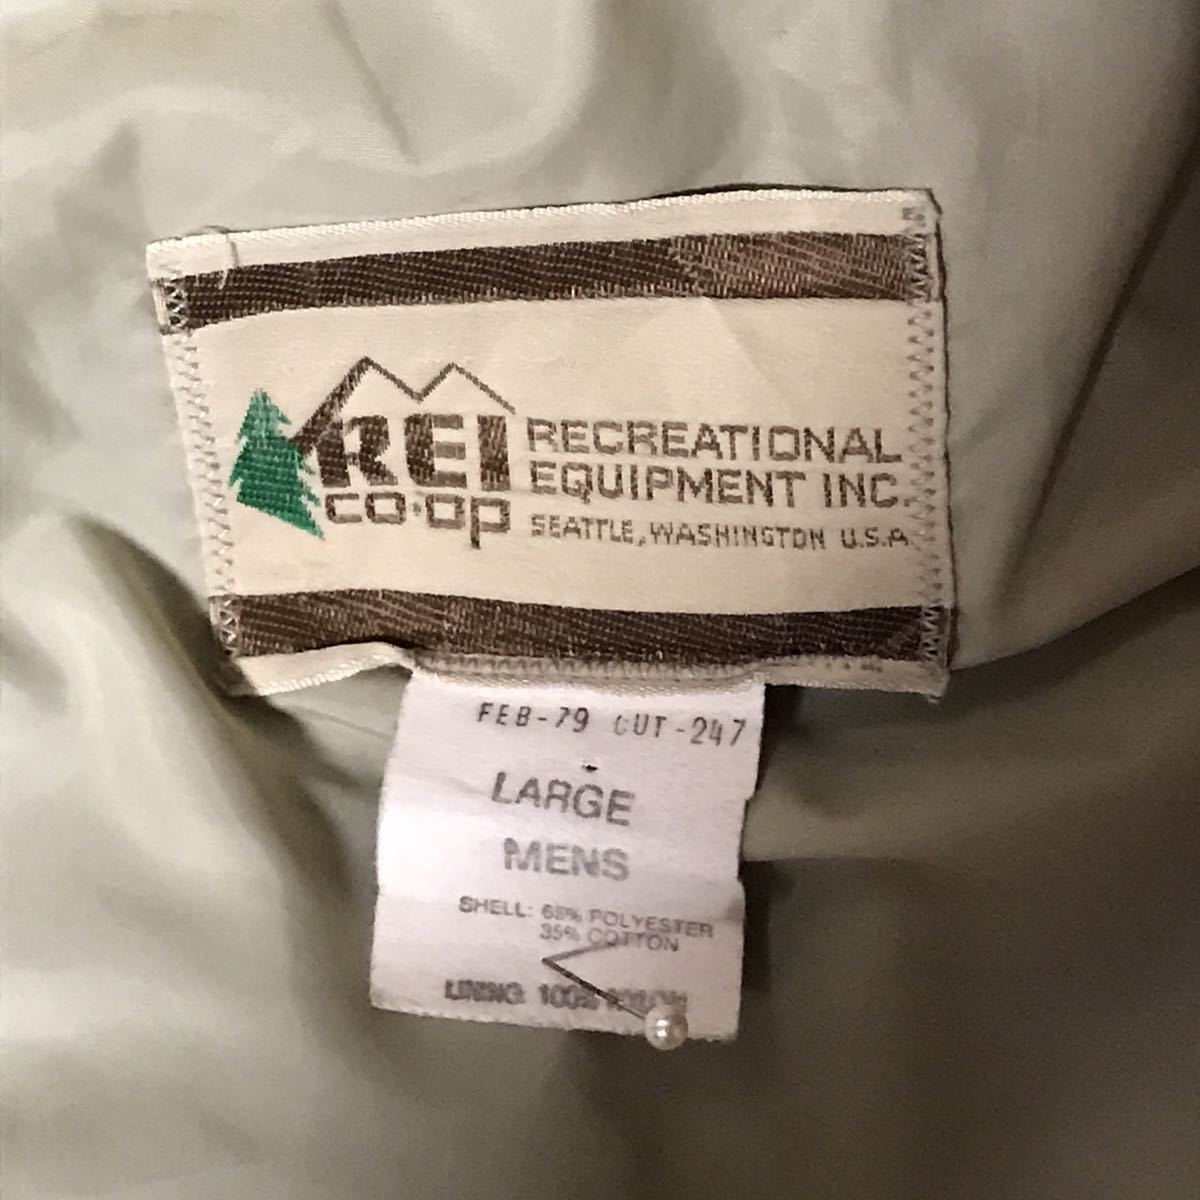 USED 80s REI MOUNTAIN PARKA MADE IN USA 中古 80's R.E.I. マウンテンパーカー アメリカ製 サイズ LARGE アールイーアイ 送料無料